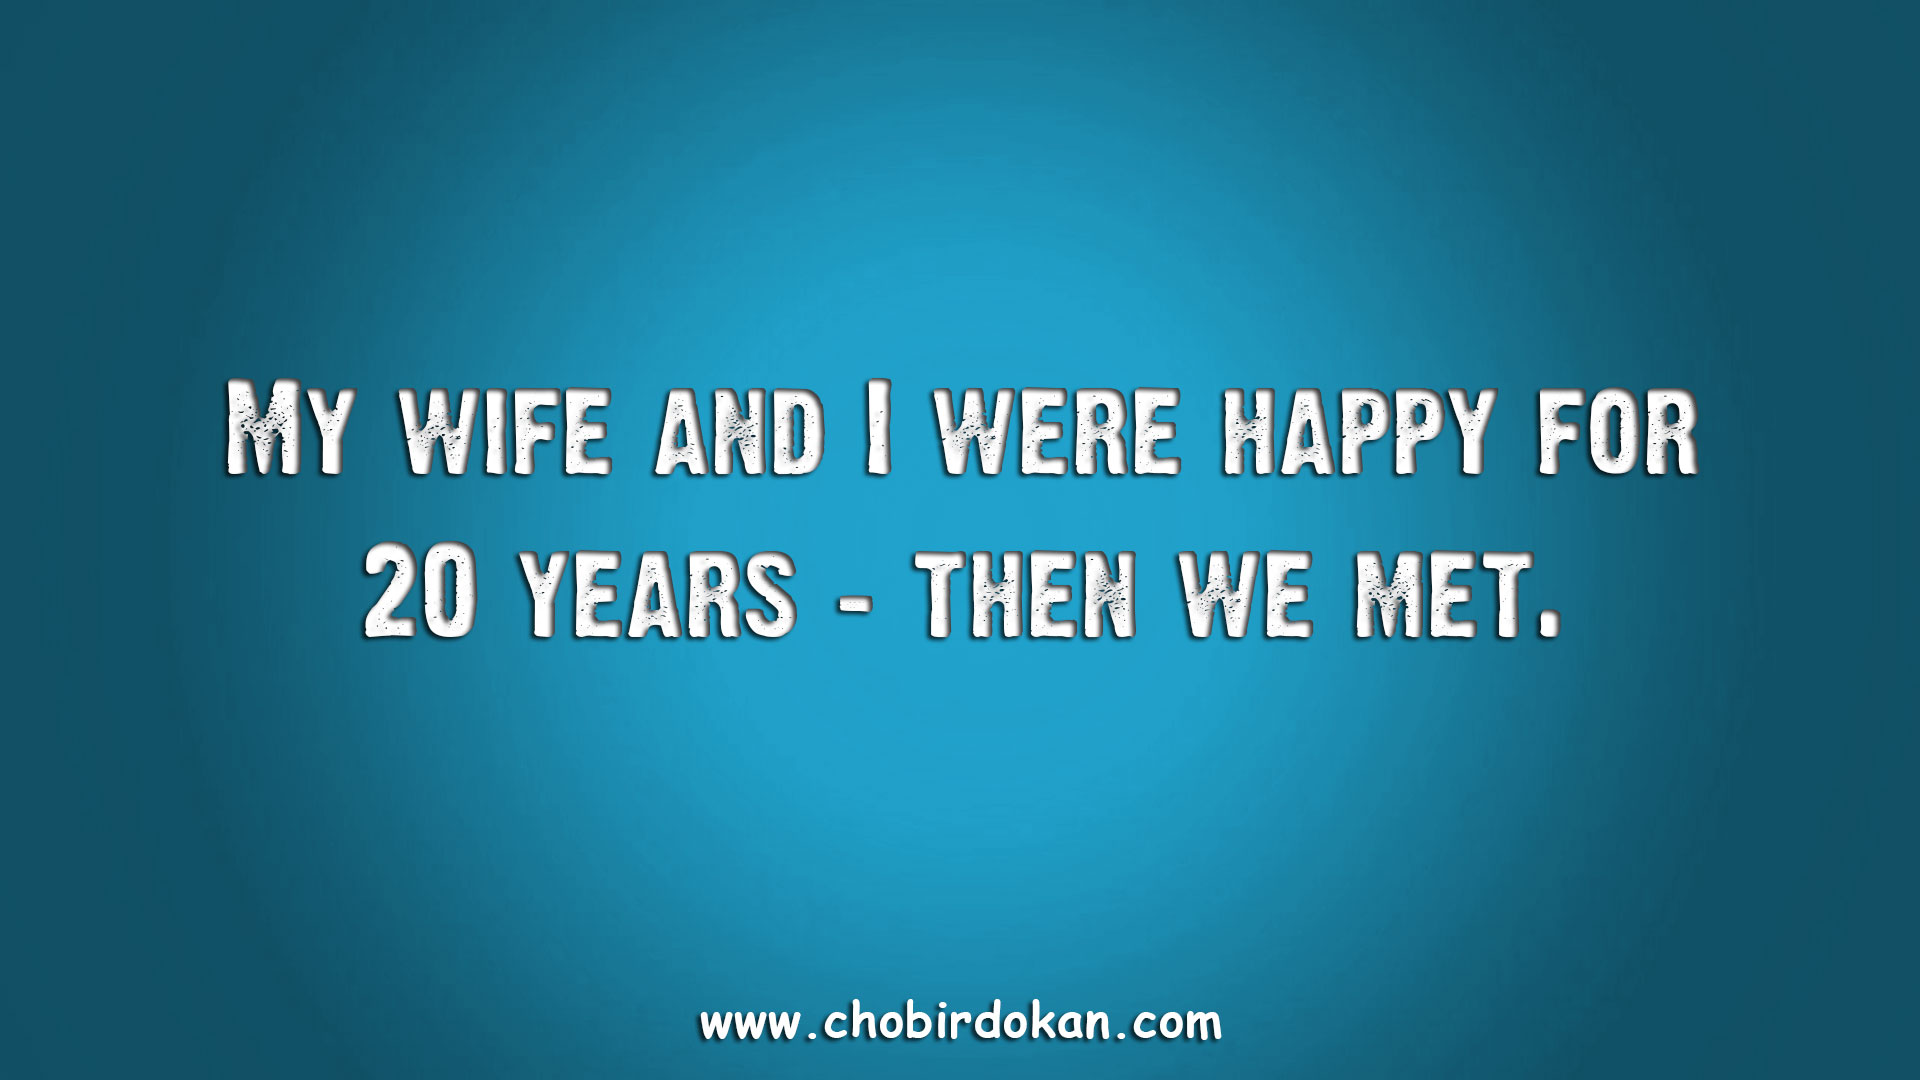 Funny Husband and Wife Quotes Images -Chobir Dokan